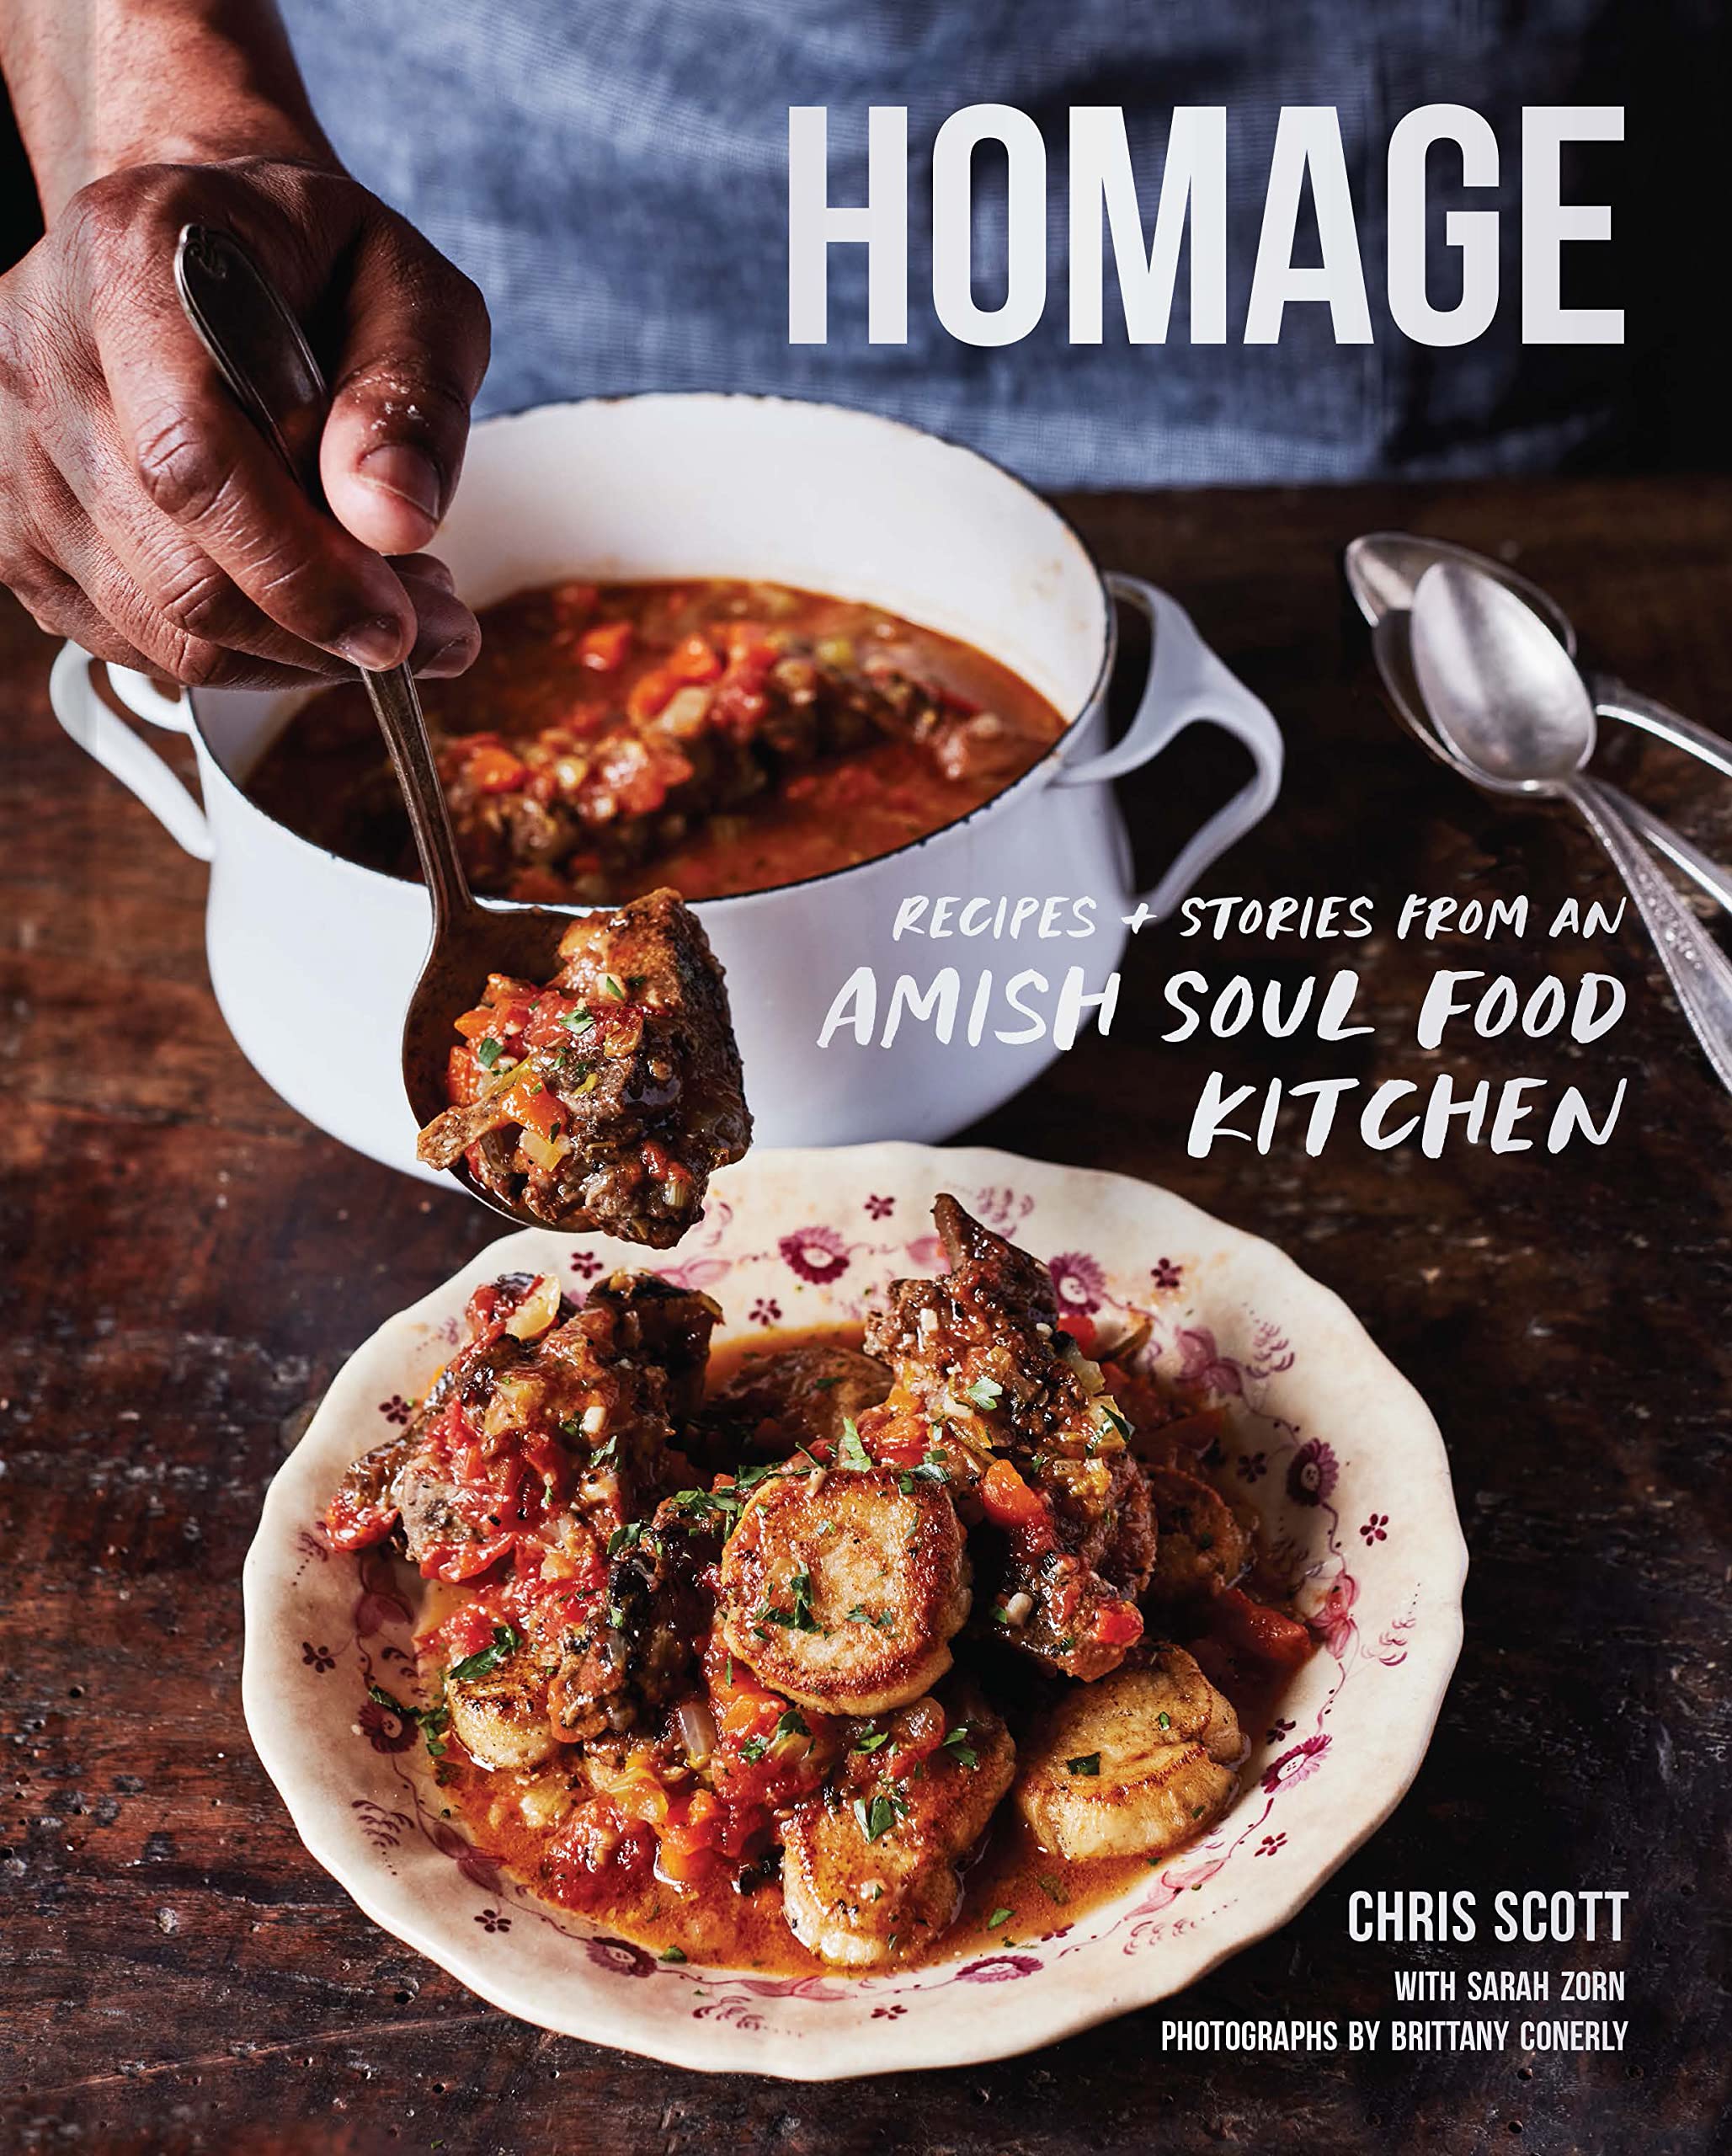 Homage: Recipes and Stories from an Amish Soul Food Kitchen (Chris Scott, Sarah Zorn) *Signed*